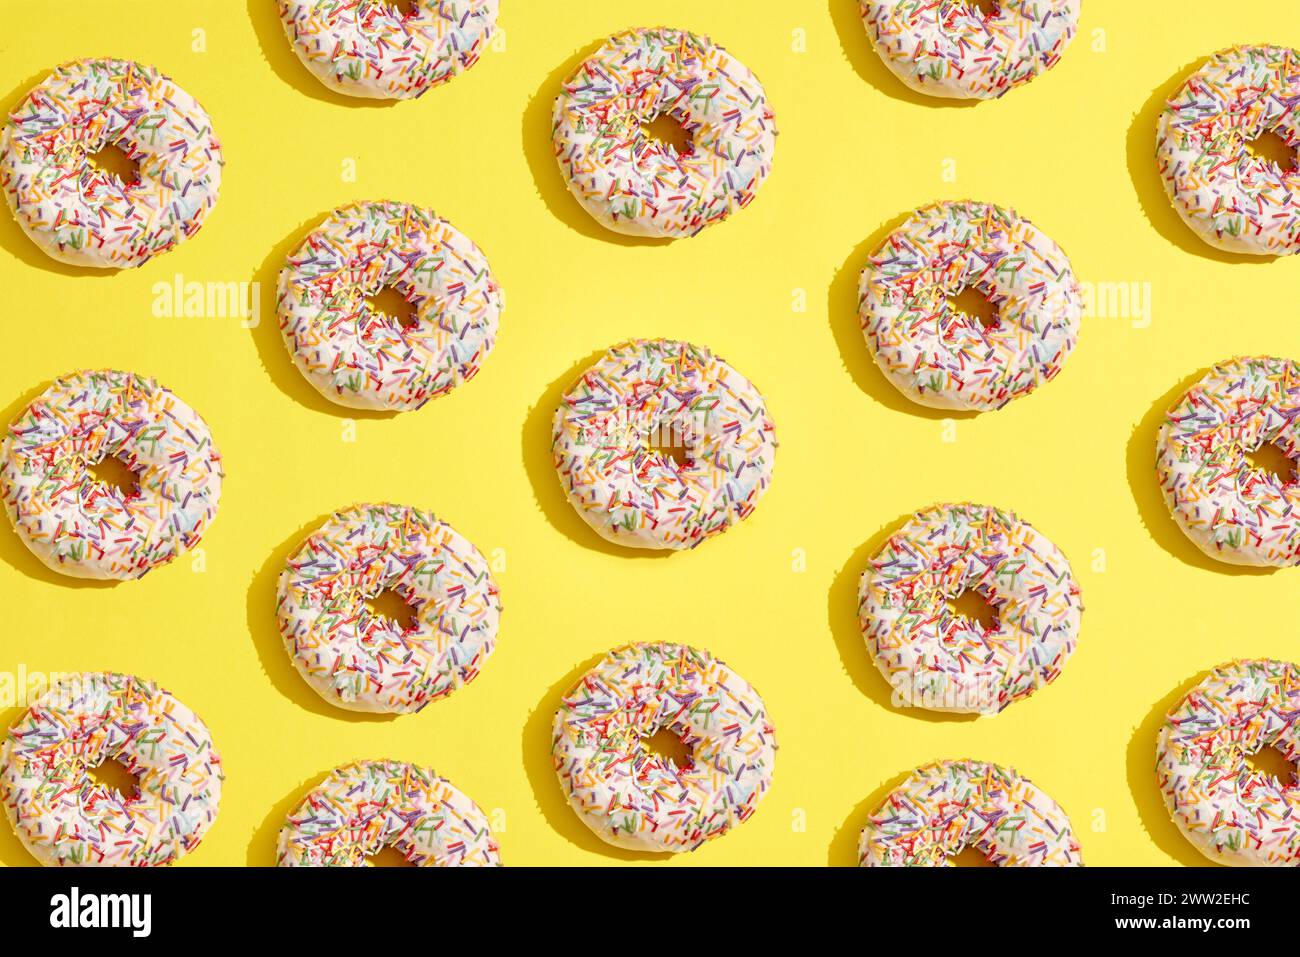 A pattern of donuts on a yellow background Stock Photo